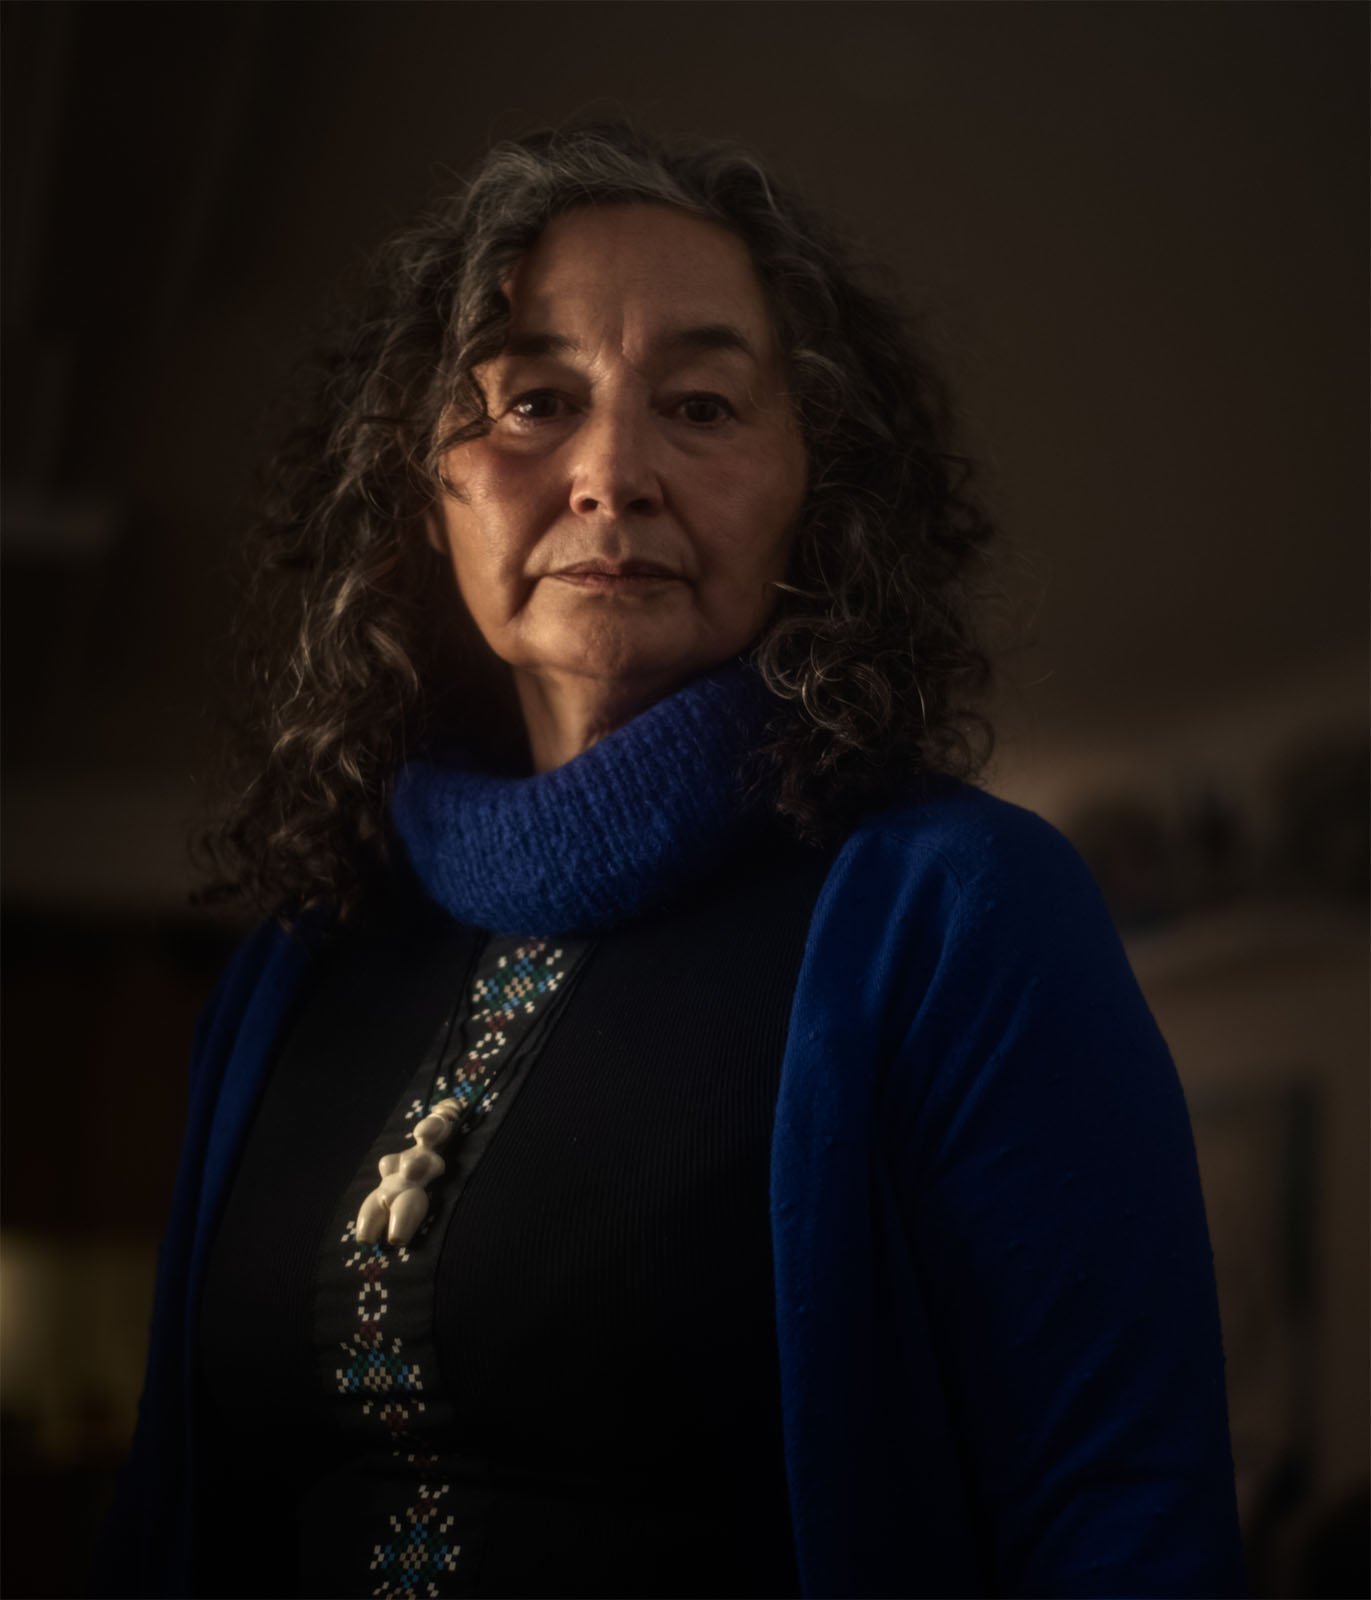 Portrait of an elderly woman with curly gray hair, wearing a blue scarf and a black shirt, looking solemnly at the camera in a dimly lit room.